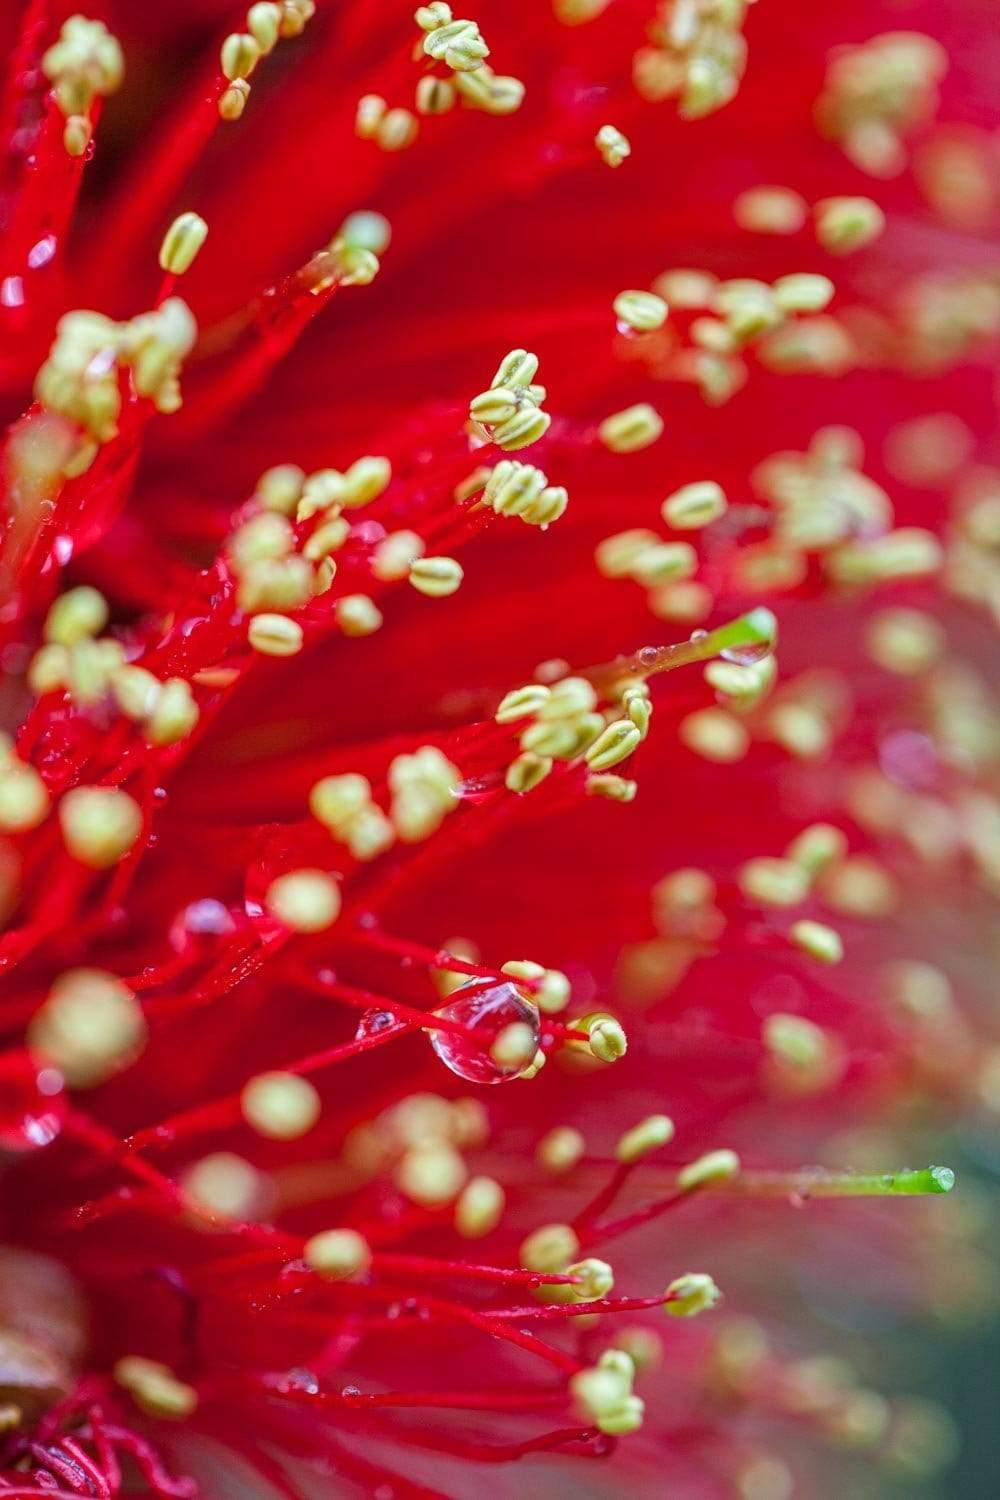 A close-up shot of a beautiful red-colored Banksia flower with mustard seeds on the edges and some drops of water, Banksia Flower - Kangaroo Island SA